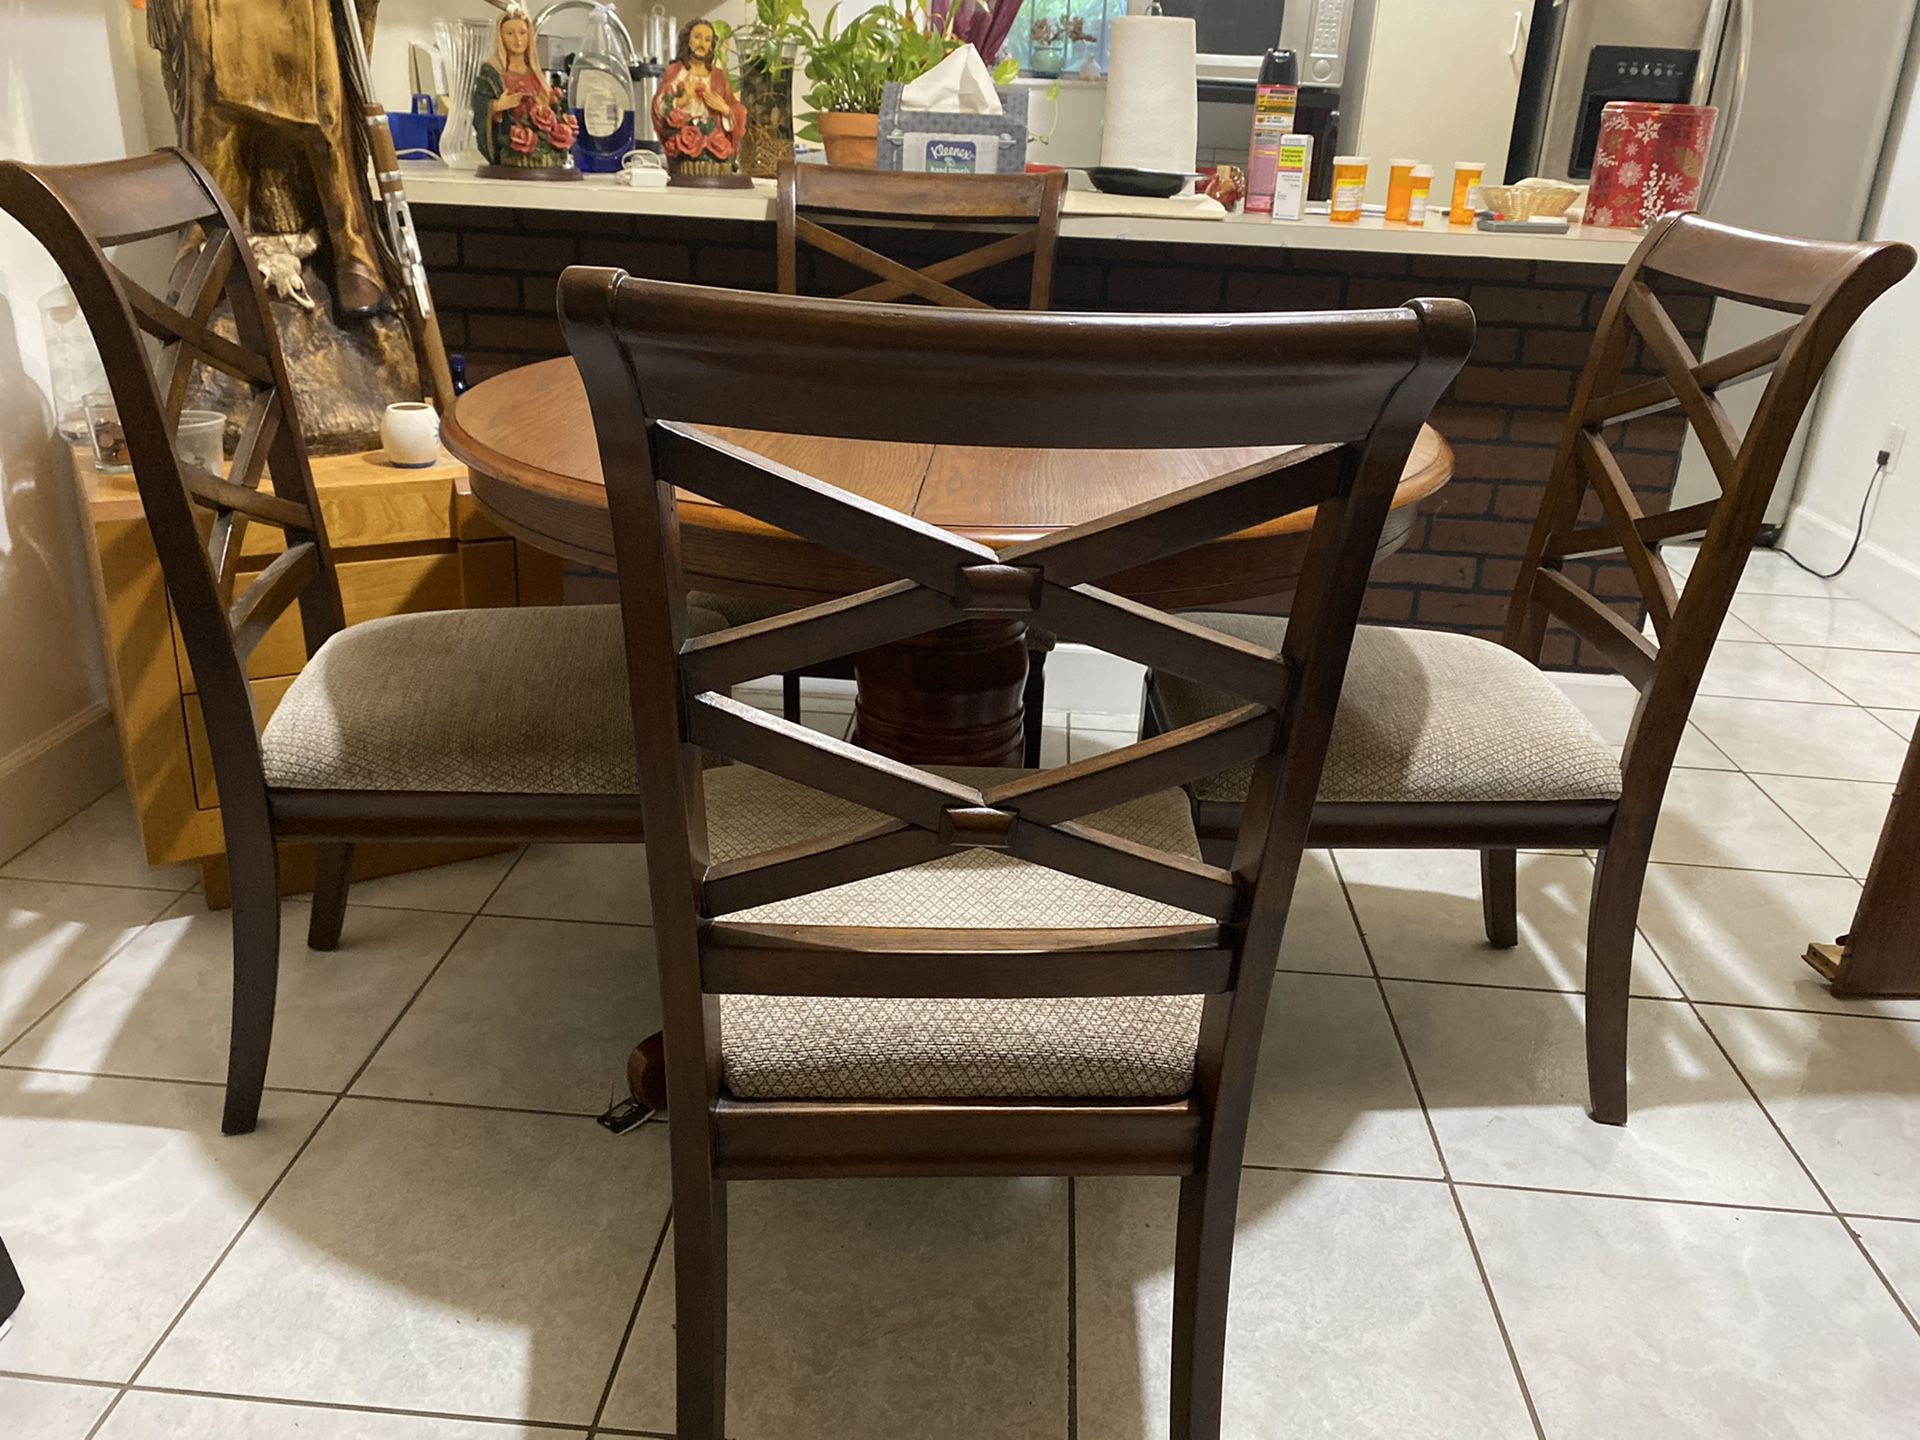 Adjustable kitchen table with 5 chairs